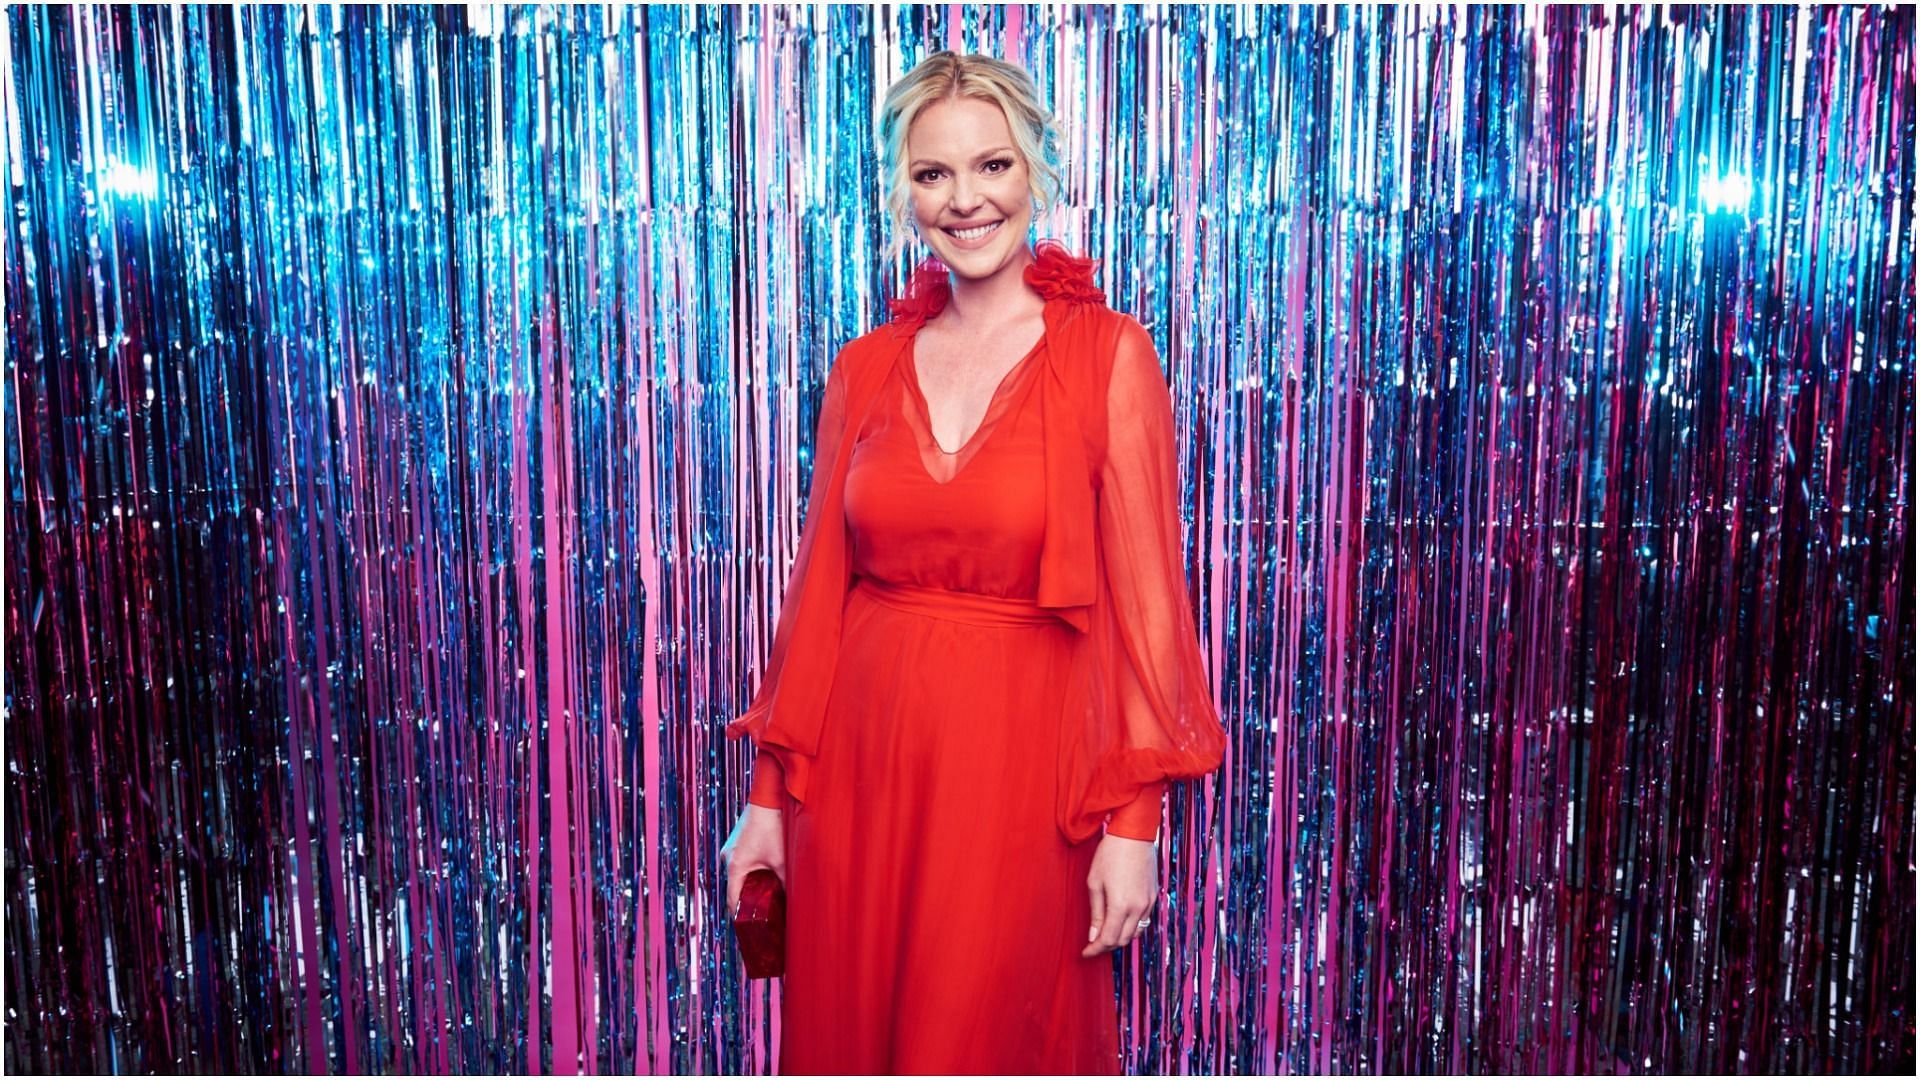 Katherine Heigl poses for a portrait at Music City Convention Center on June 7, 2017, in Nashville, Tennessee (Image via John Shearer/Getty Images)